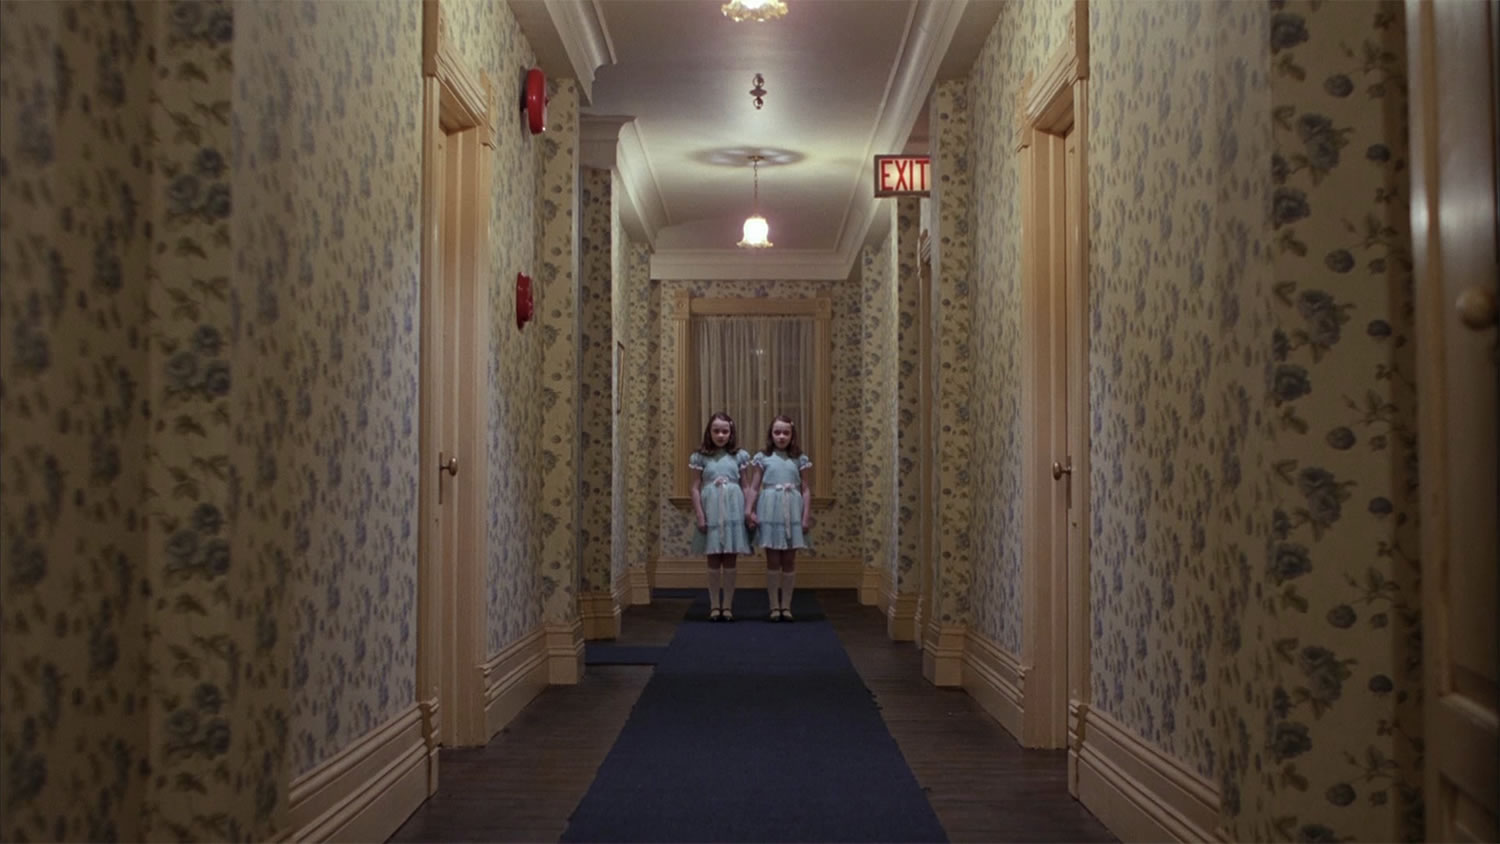 The haunted hallways of the Overlook Hotel in "The Shining" (1980)